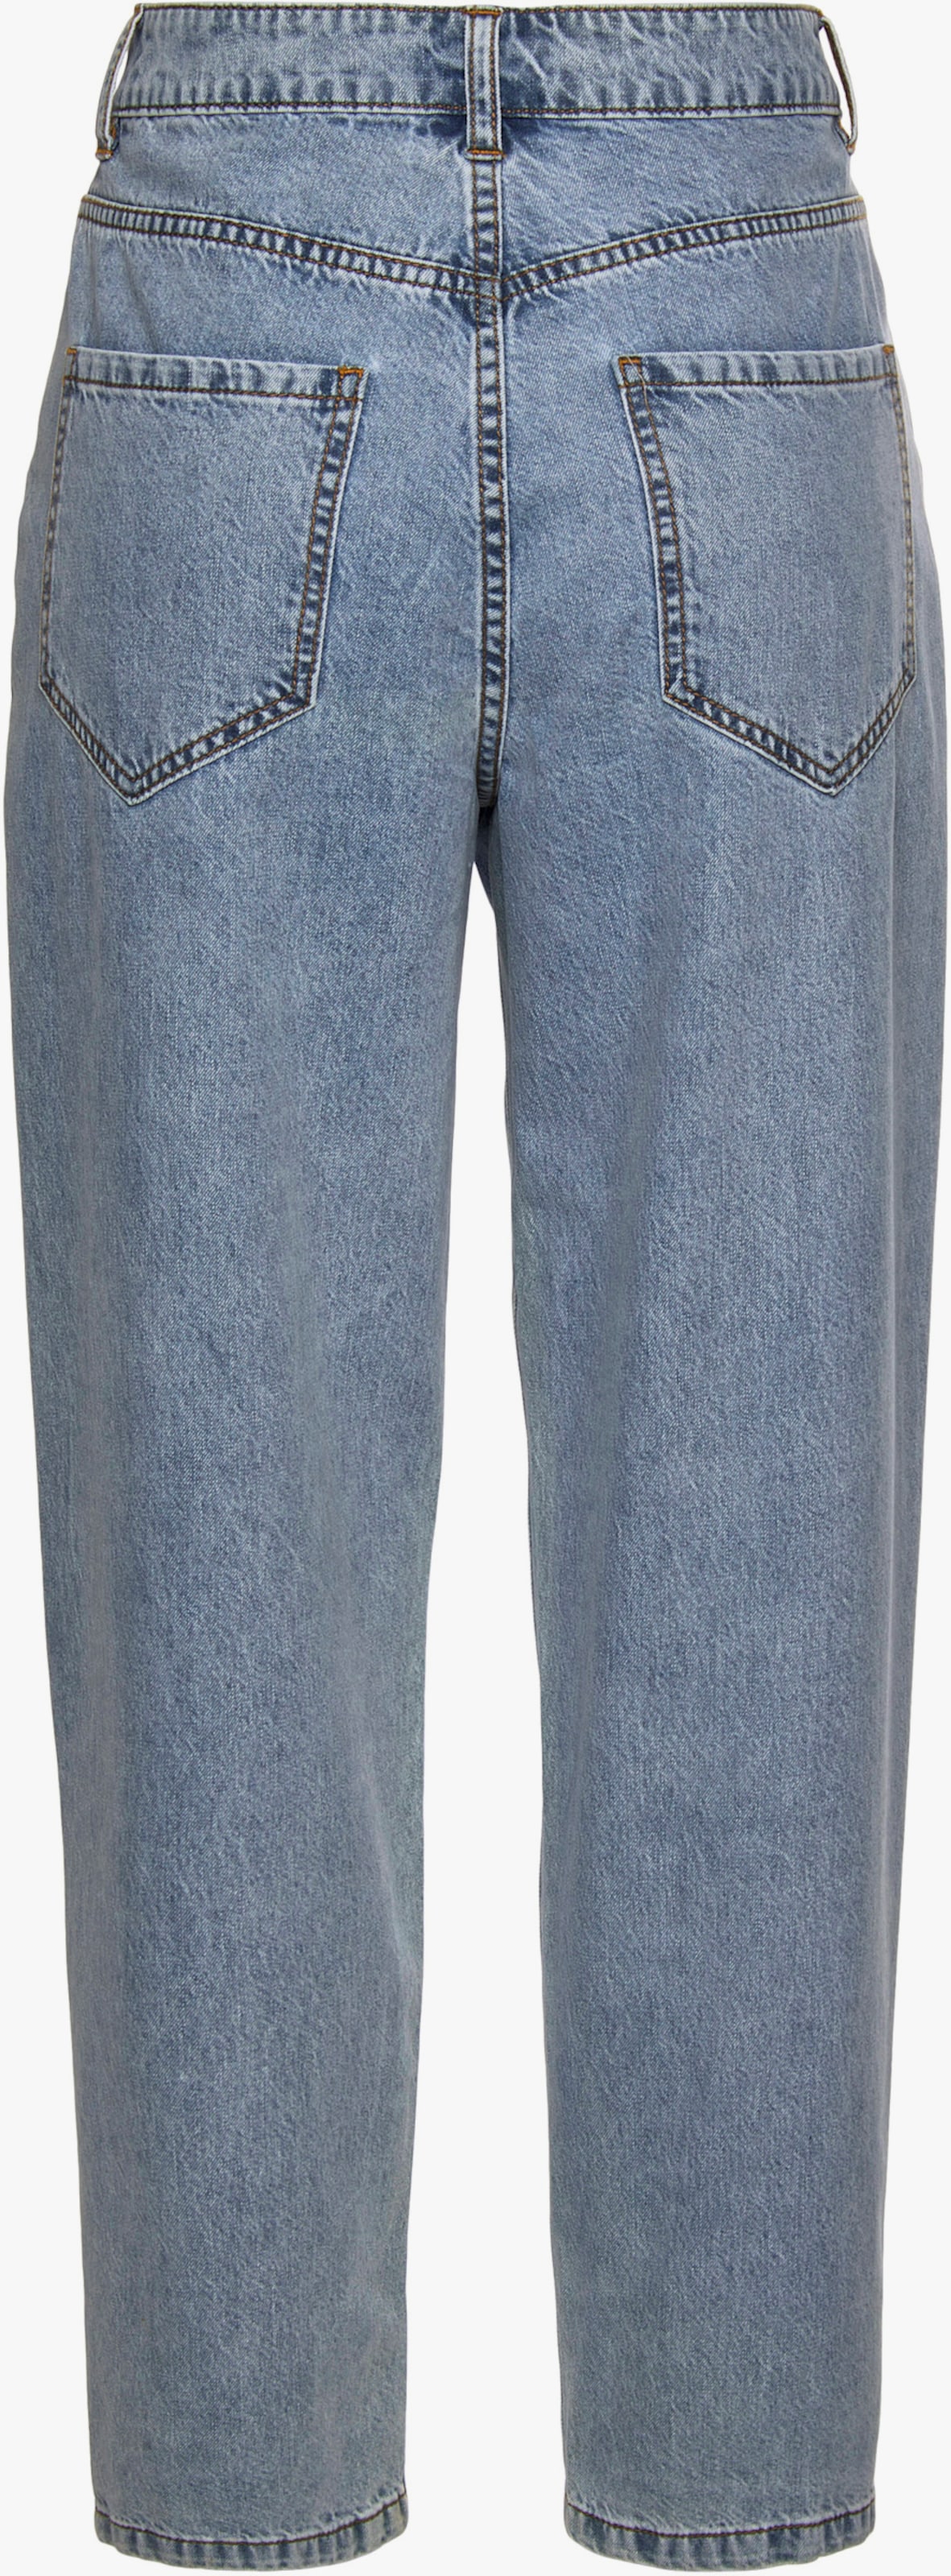 Buffalo Relaxfit jeans - blue washed